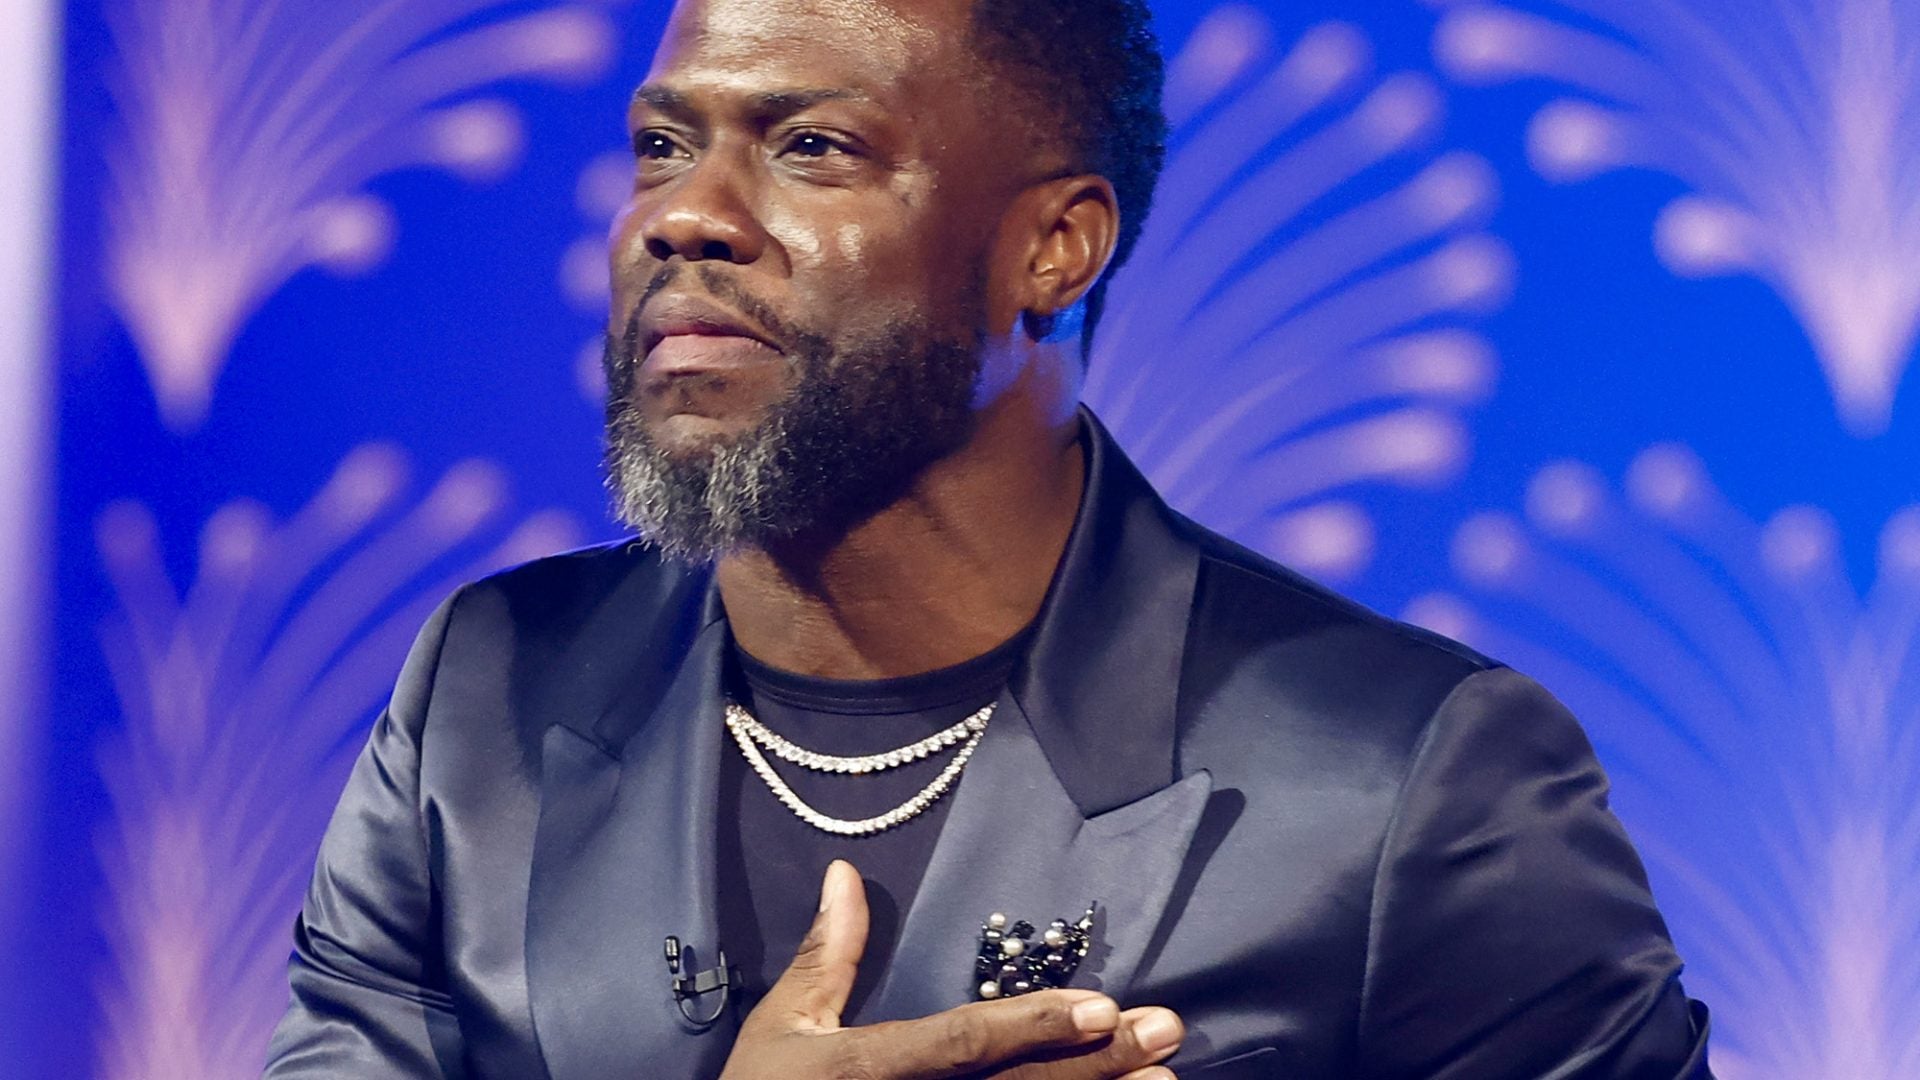 Kevin Hart's Mark Twain Prize Gala Was A Star-Studded Salute To His Comedic Genius